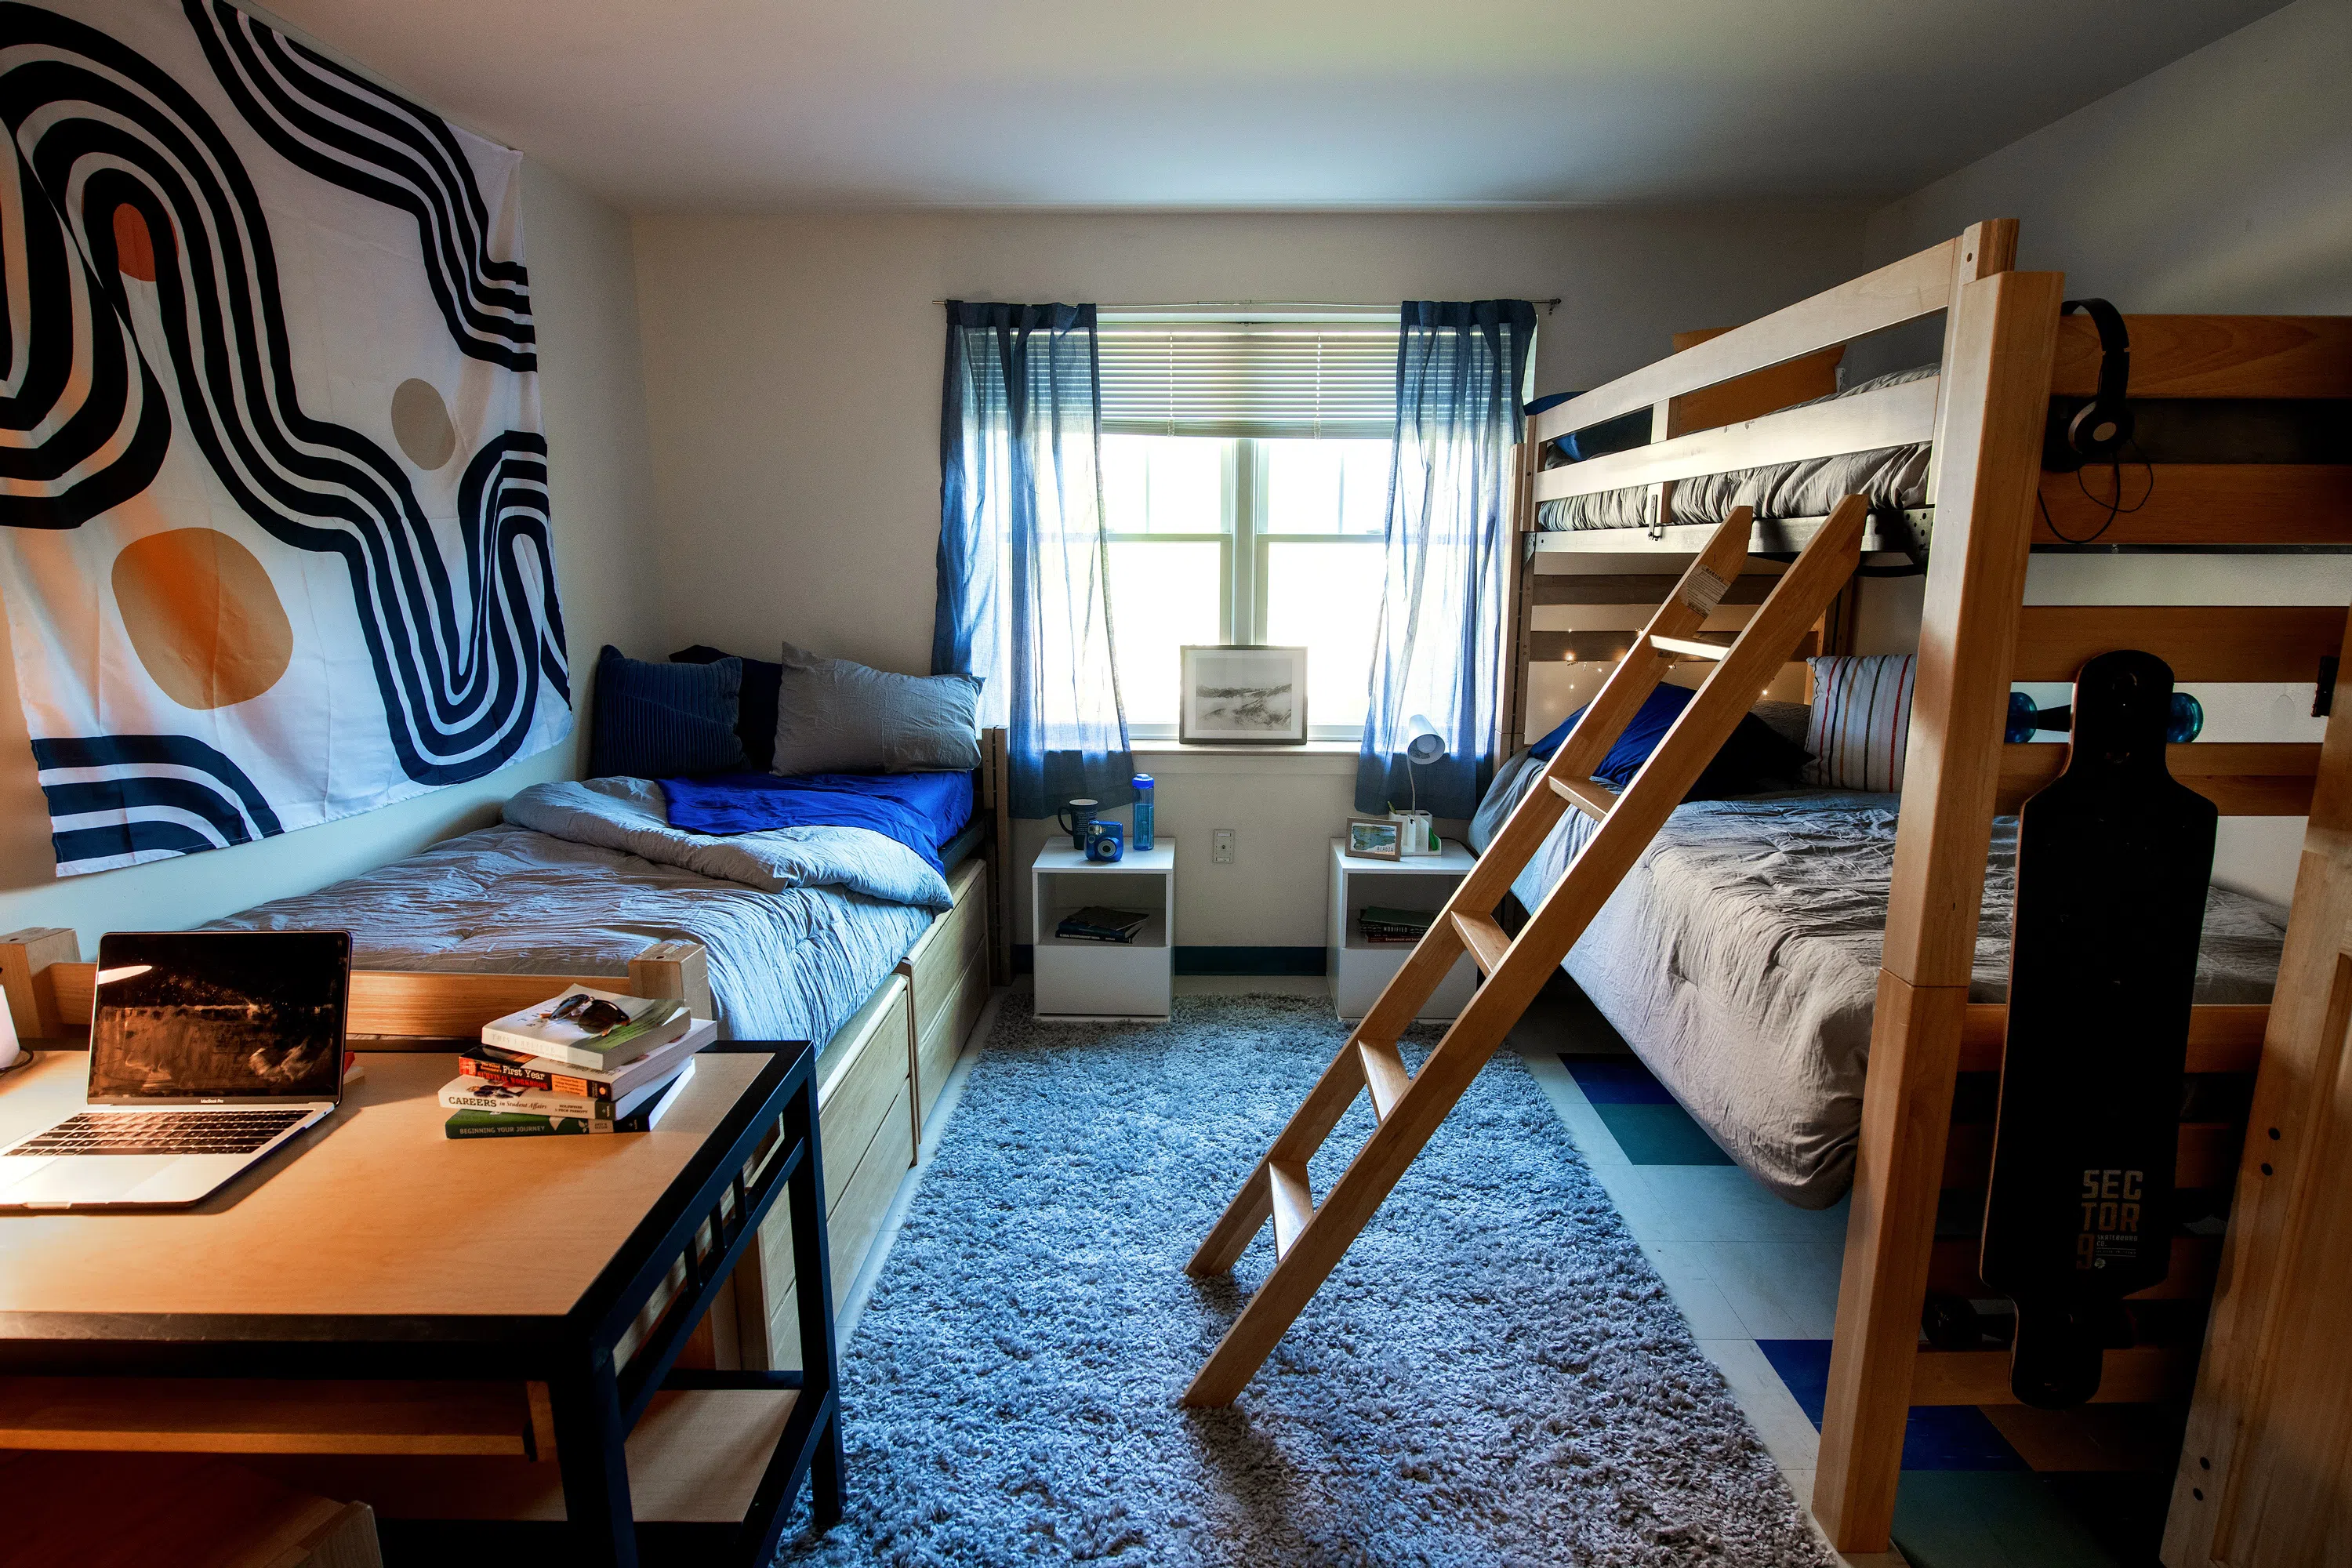 A single bed on the left of the room and the right side has a bunk bed with two beds. The back wall has a large double window. A desk is in the foreground. Decor includes: a tapestry, lamps, rug, books, and a long board.